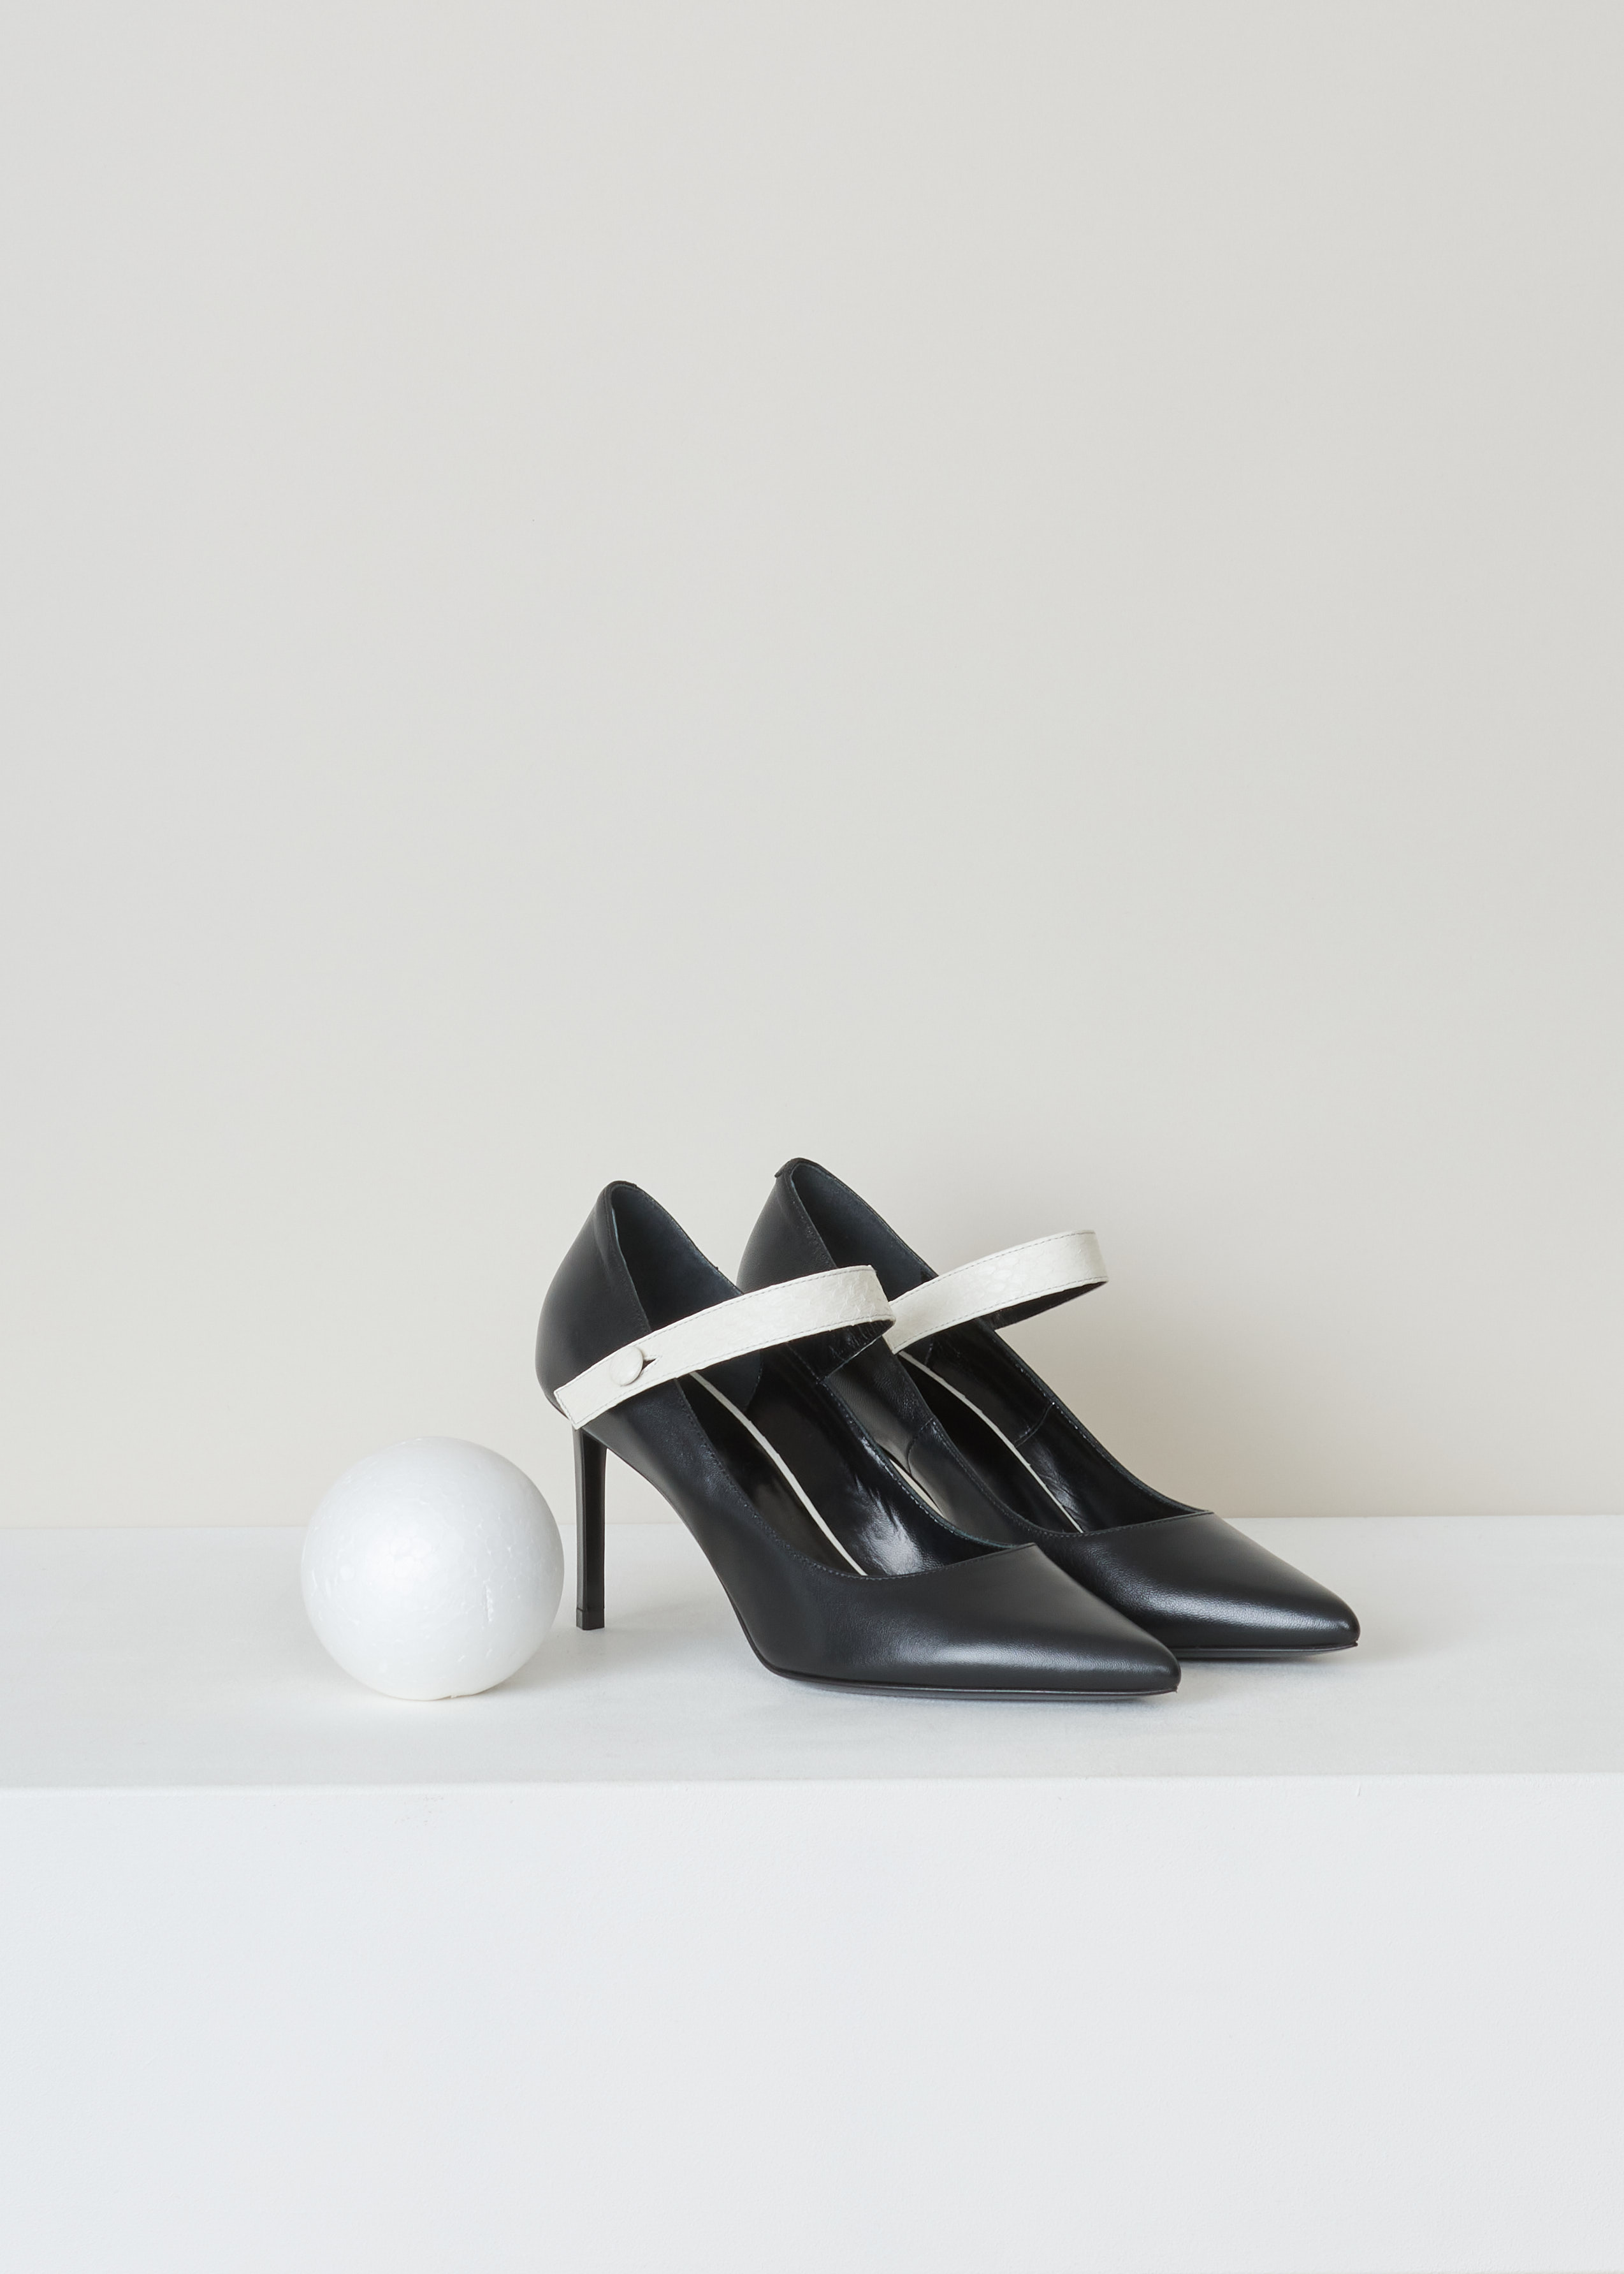 Celine, Mary jane sharp kidskin & elaphe, 330234005C_38AW_BlackWhite, black white, front, Crafted in style and highlighted with a pretty Mary Jane design, this pair of pumps exudes a glamorous shine. Made from the finest black leather, these closed-toe pumps come with regular heels, a off-white strap with button closure.